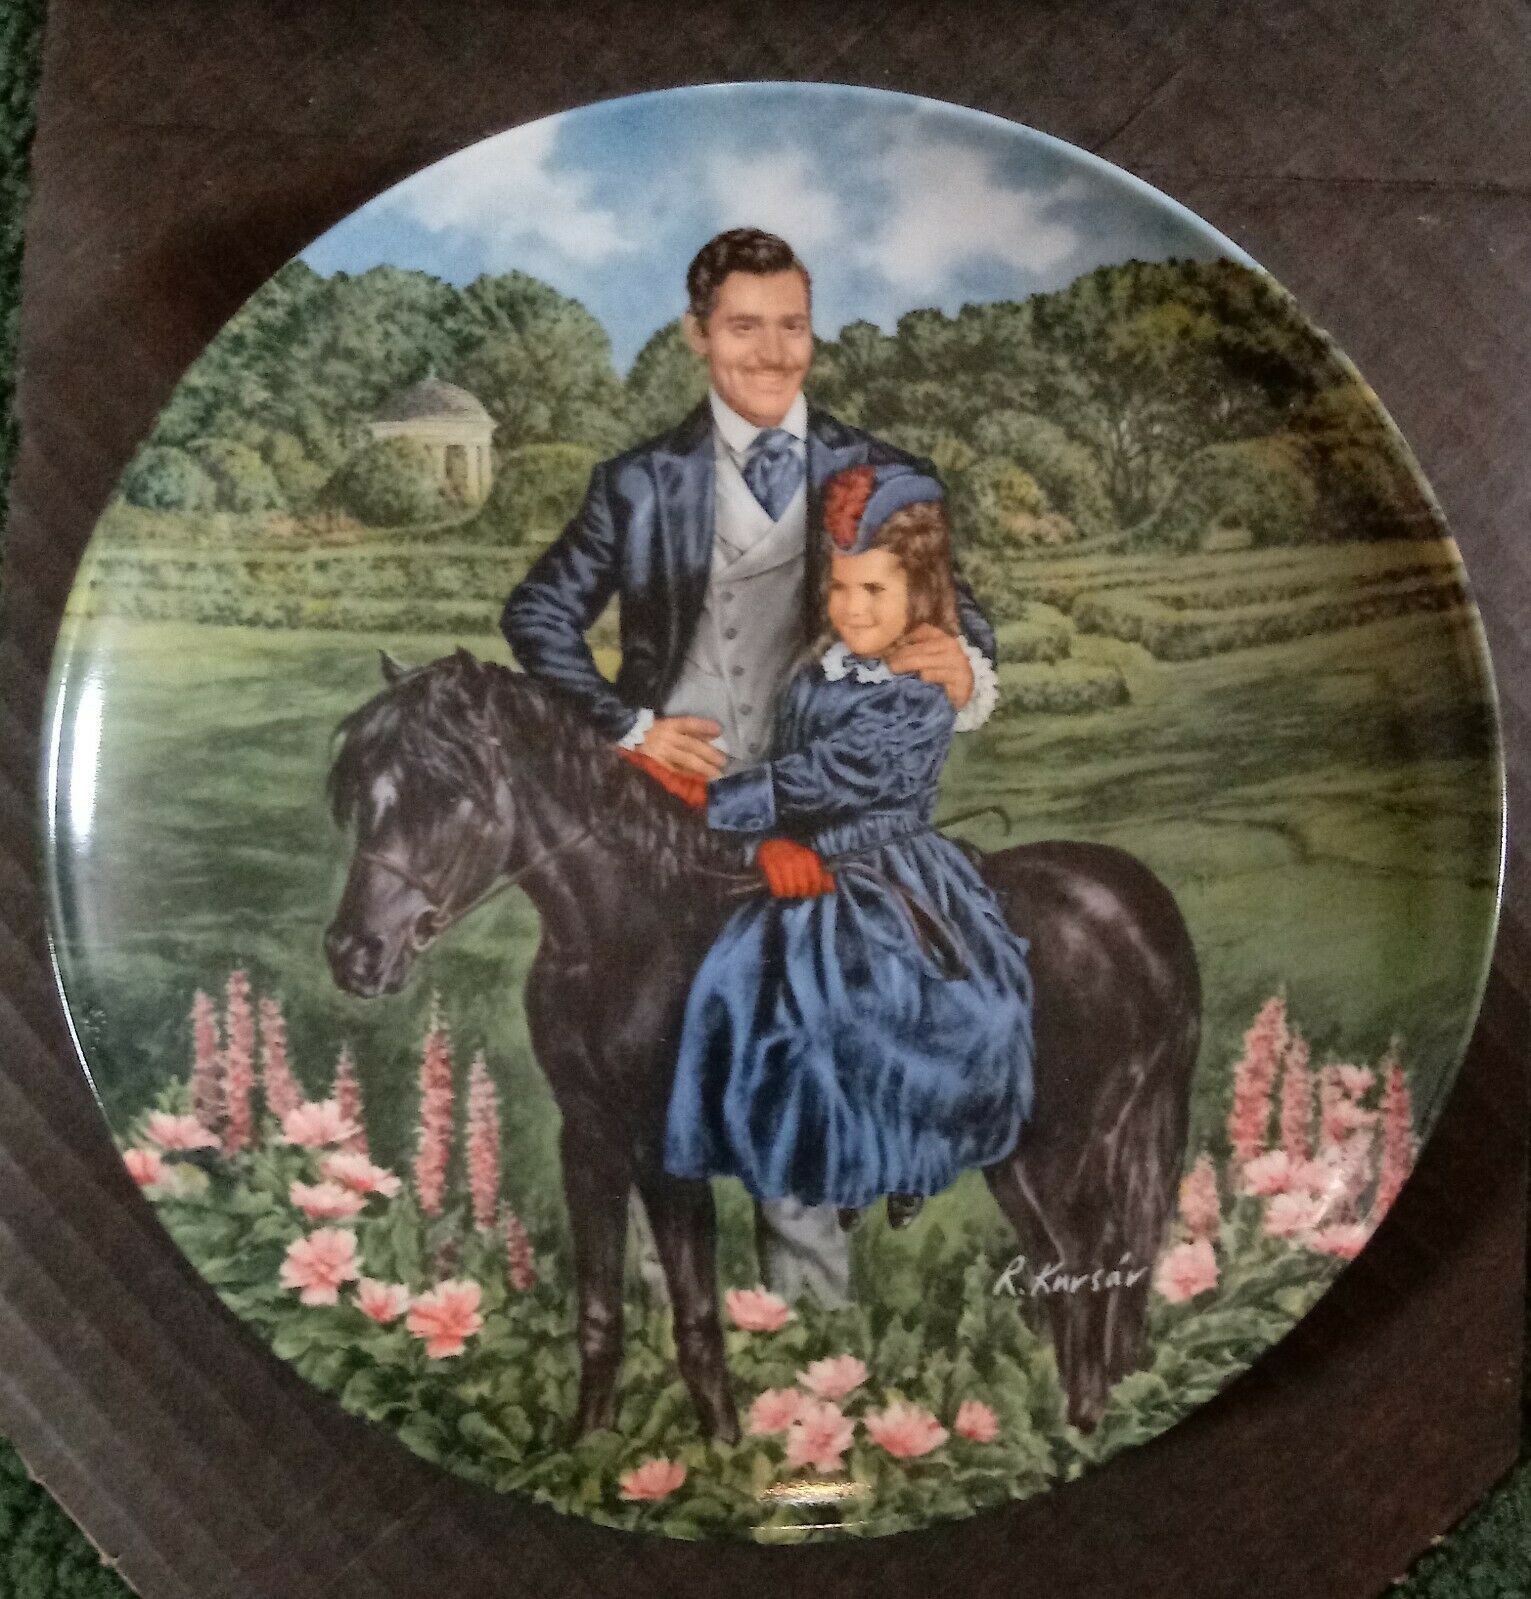 Primary image for Knowles "Bonnie and Rhett"  Gone With the Wind 8" Plate